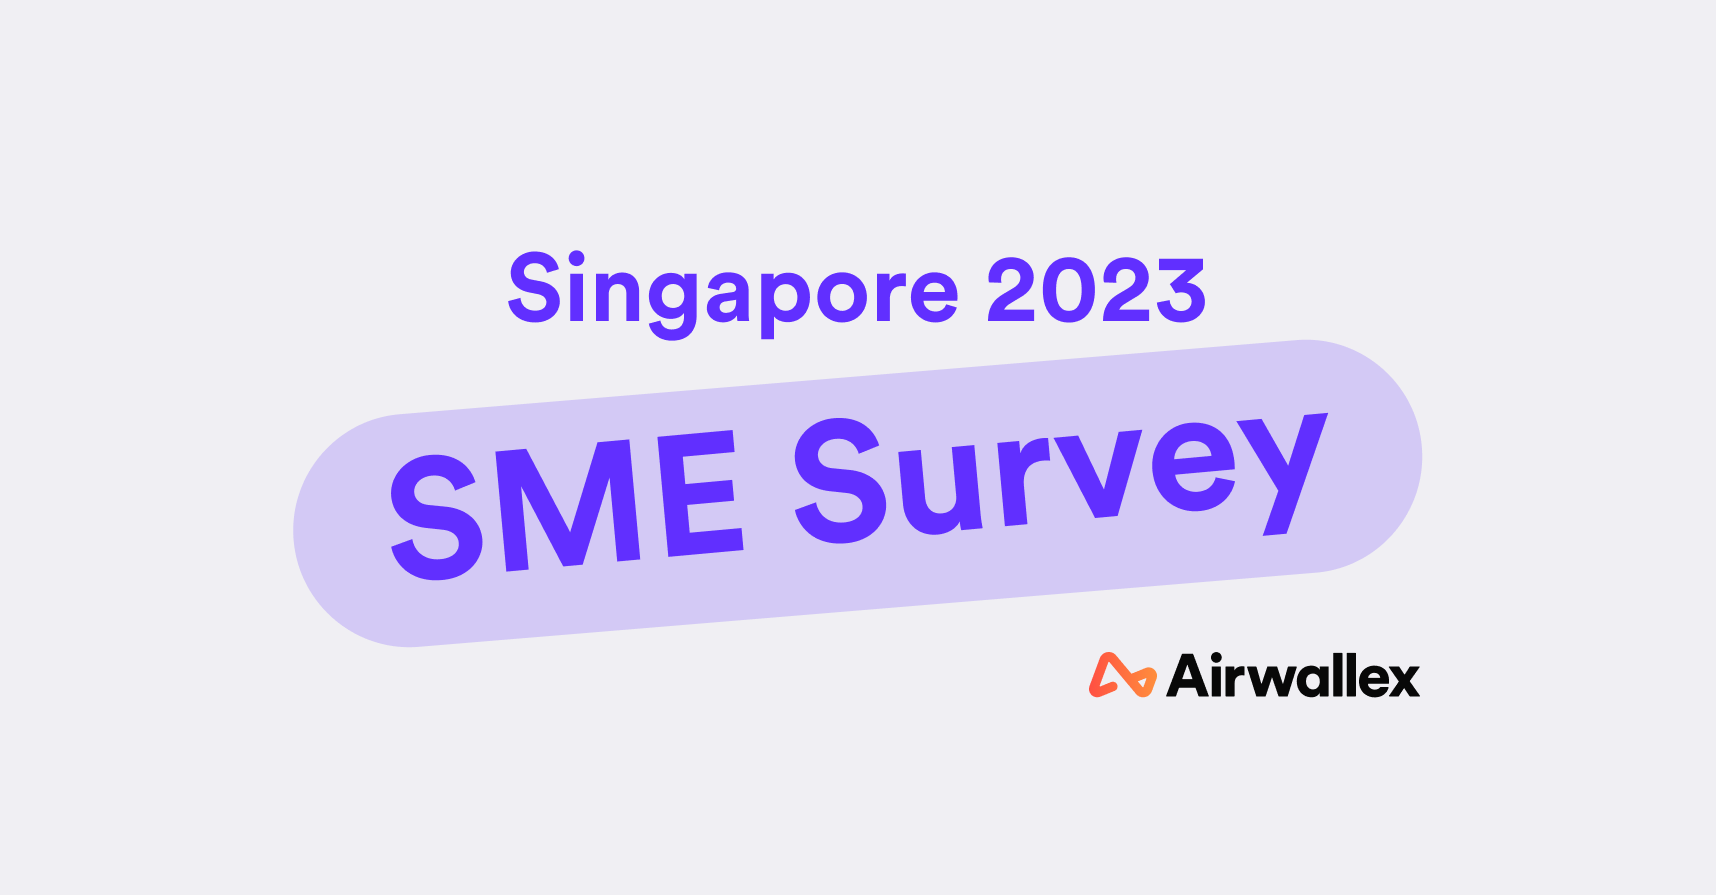 Airwallex survey finds majority of Singapore SMEs are bracing for a potential recession